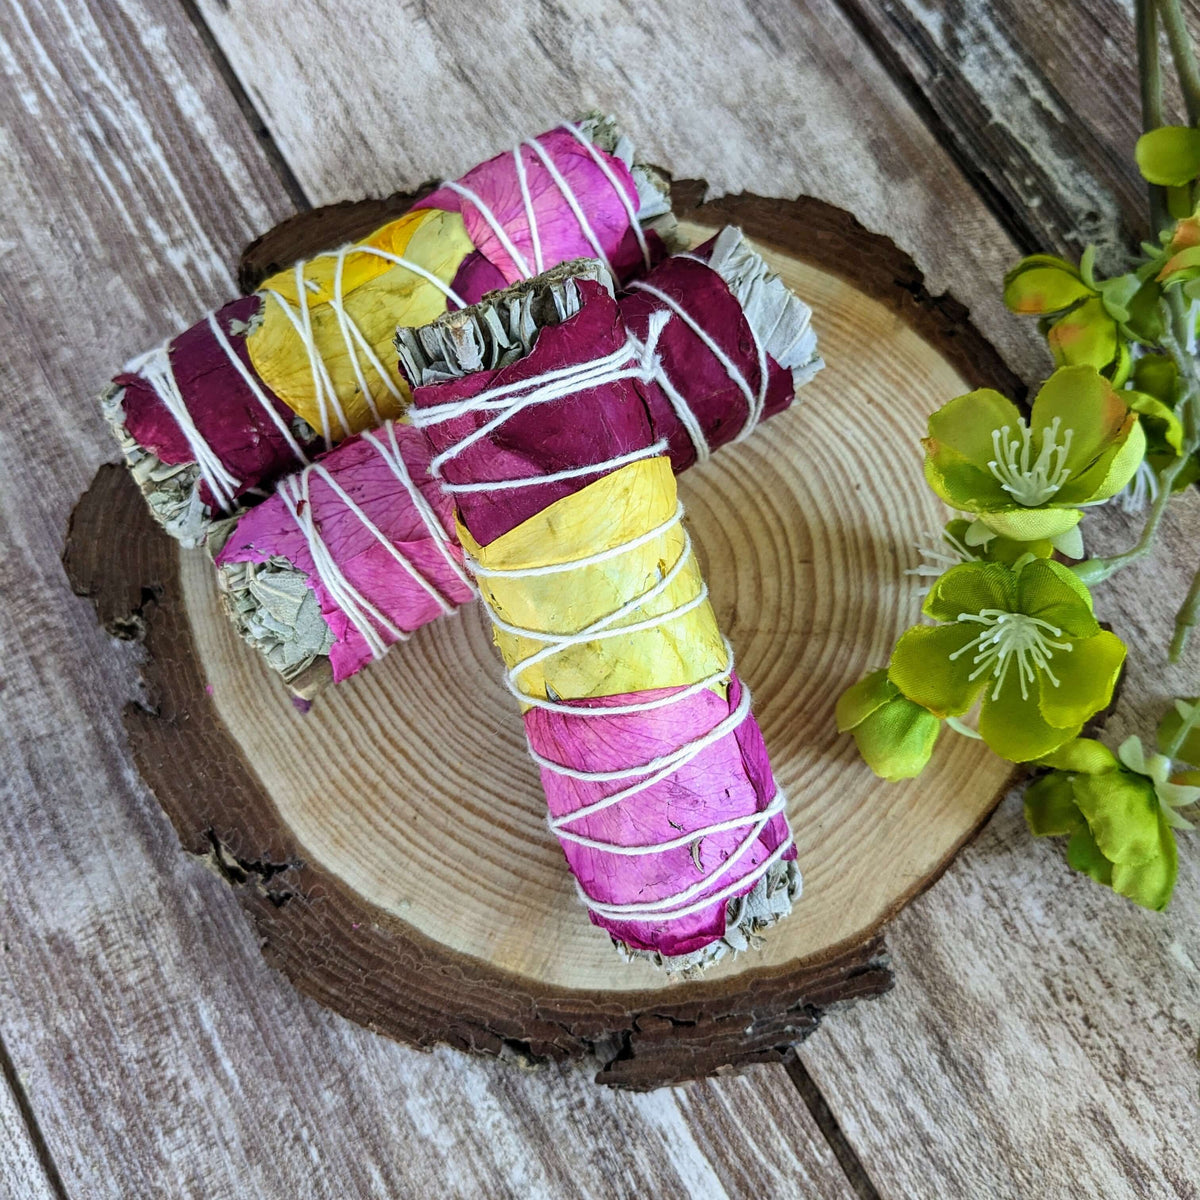 California White Sage Bundle with pink and yellow rose petals